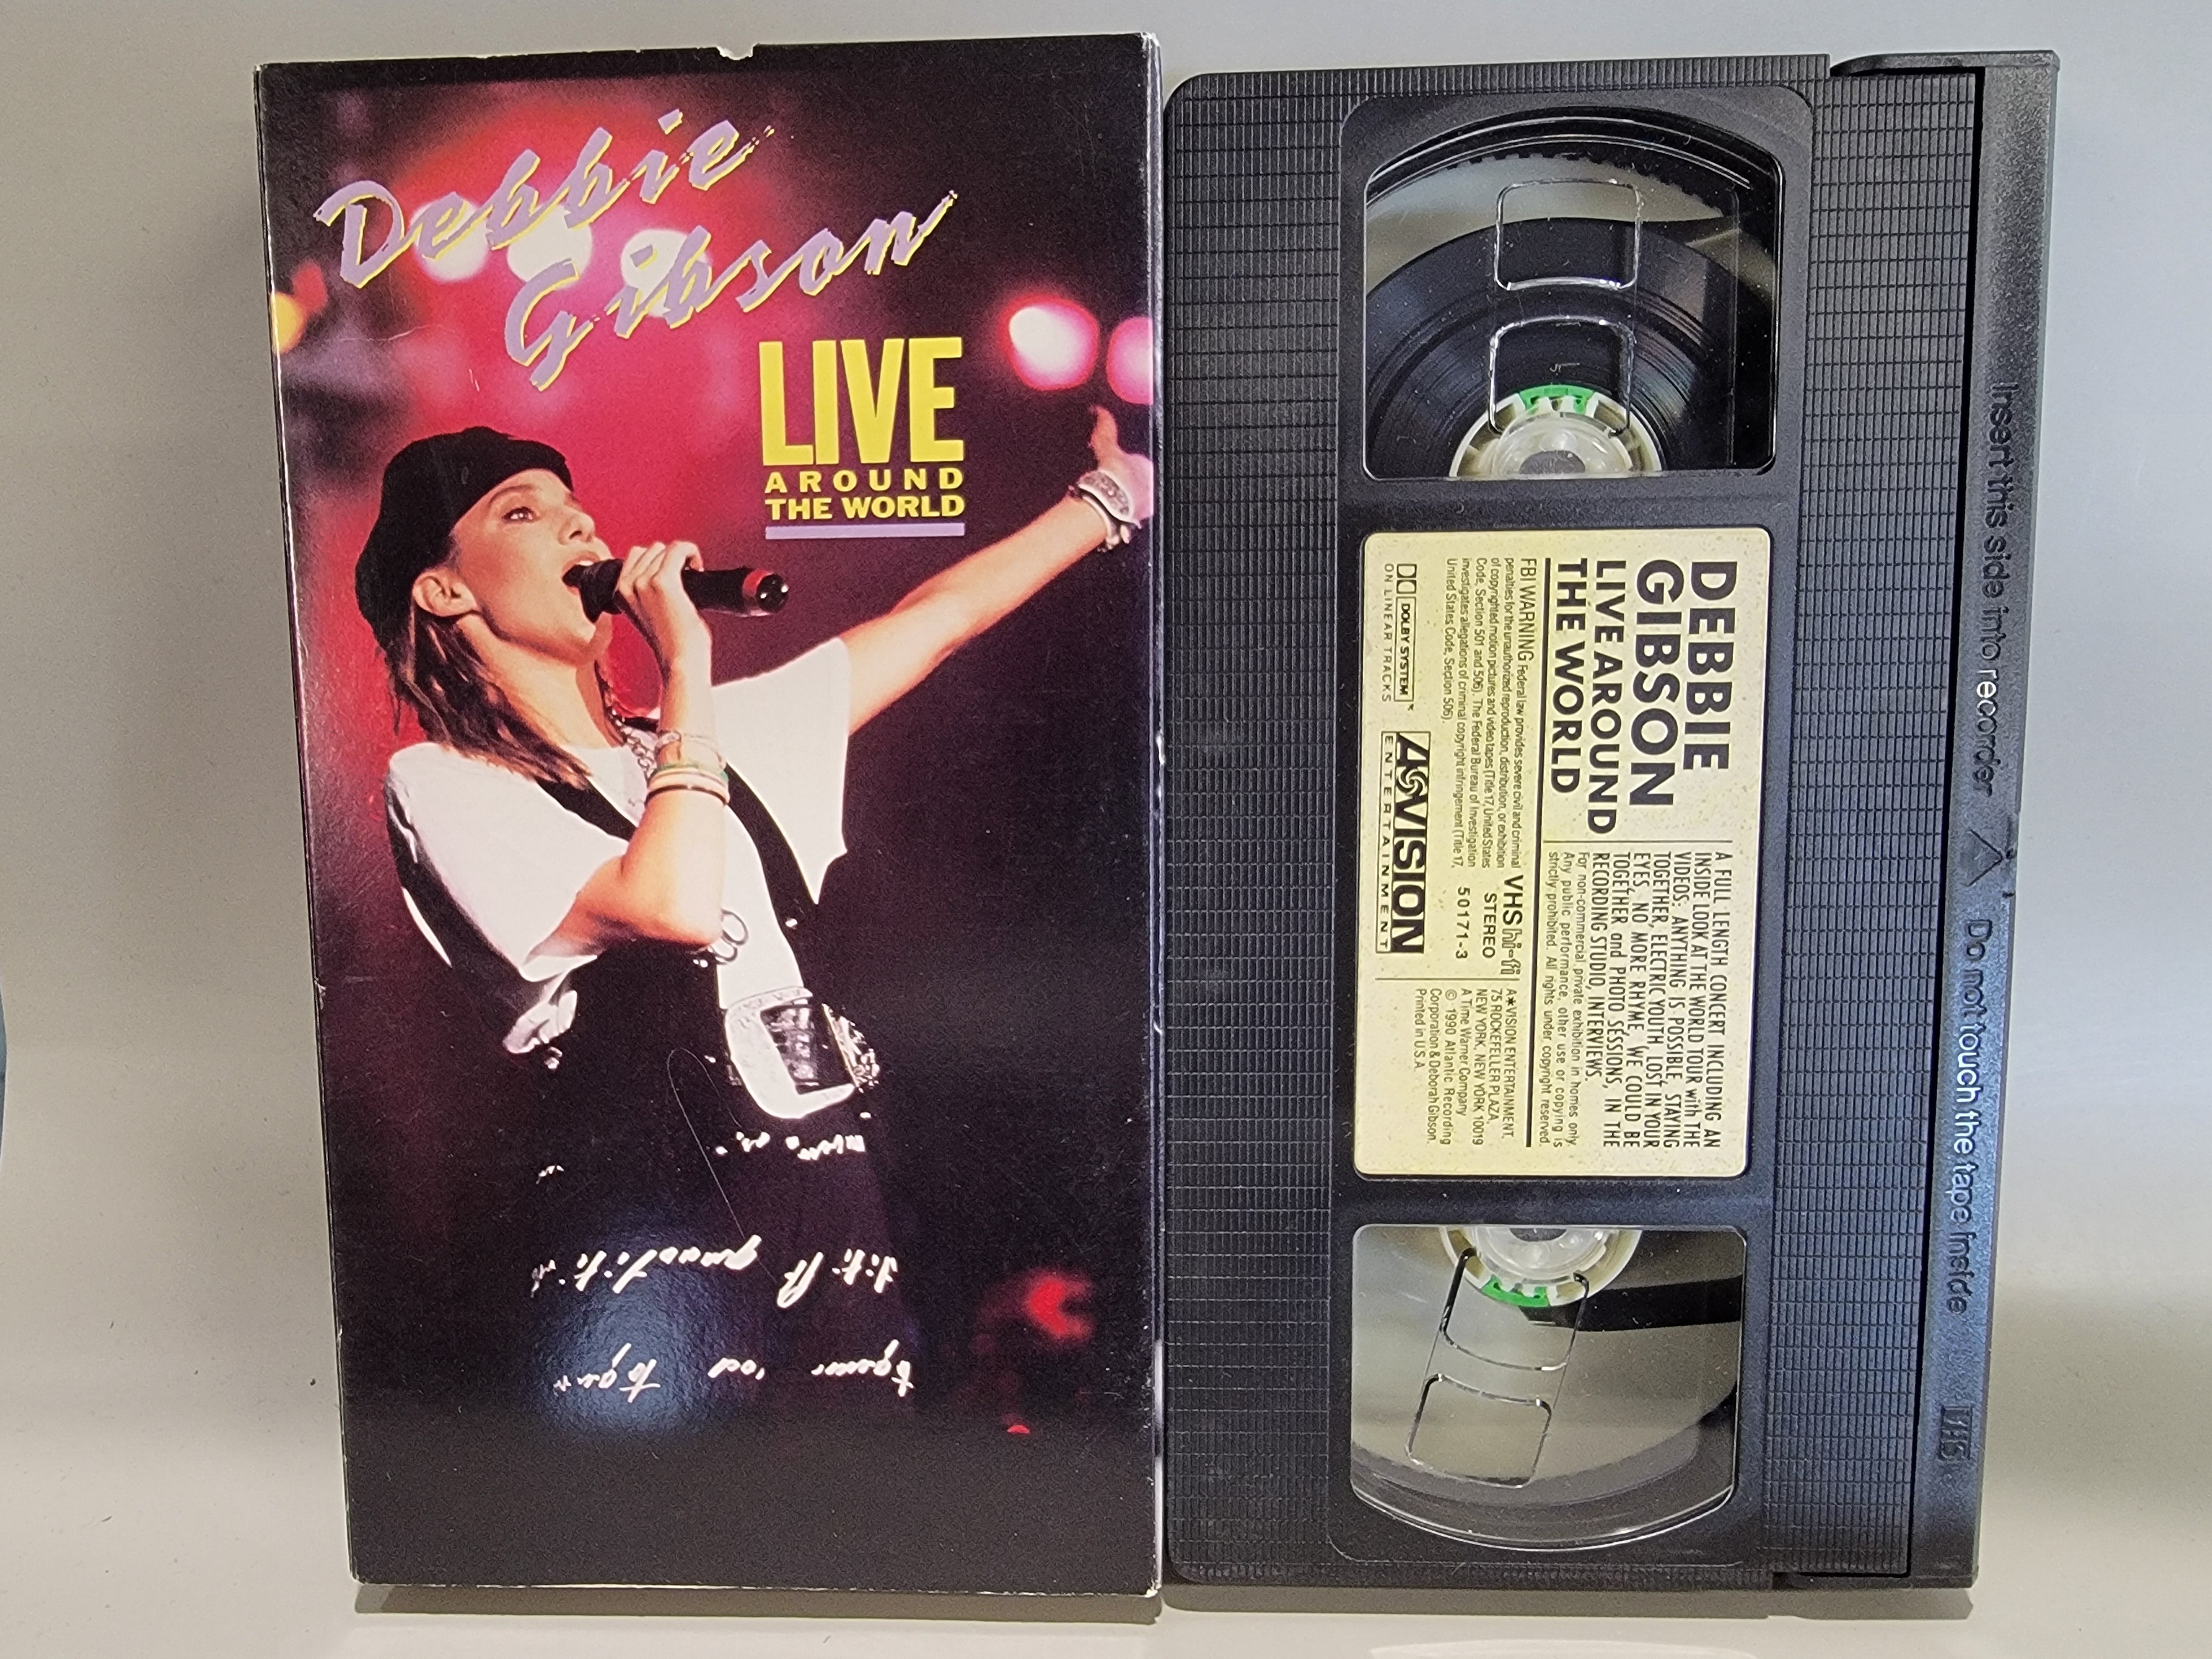 DEBBIE GIBSON: LIVE AROUND THE WORLD VHS [USED]